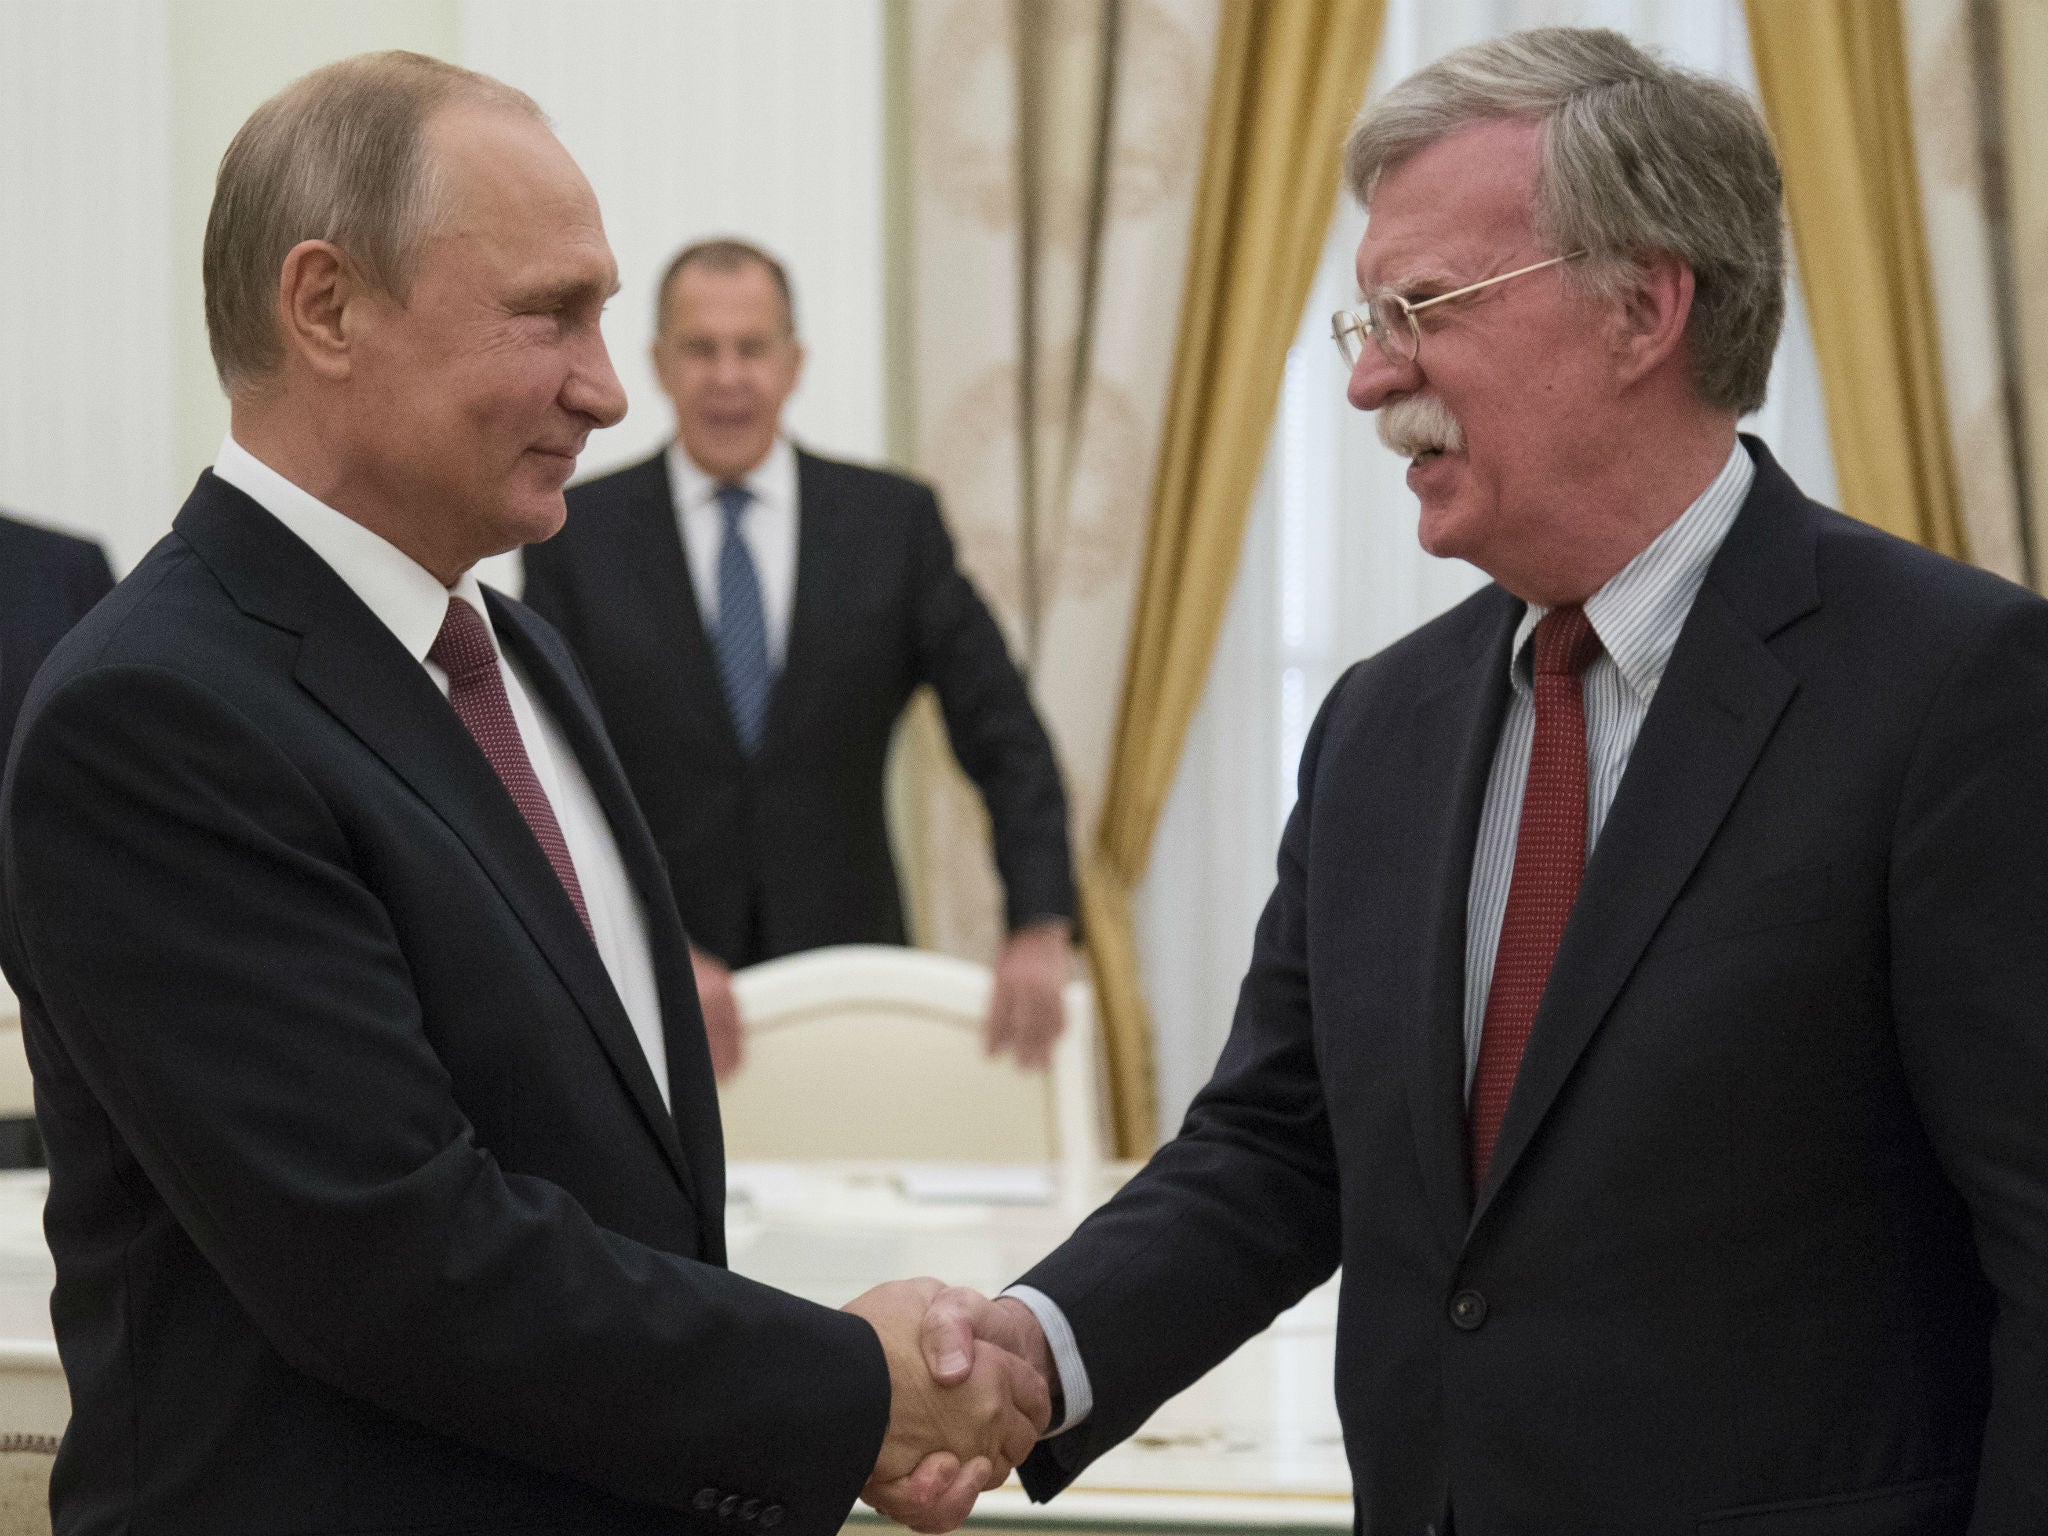 US national security adviser John Bolton met Putin in Moscow and said he hoped Russia and the United States could find ‘areas where we can agree and make progress together’